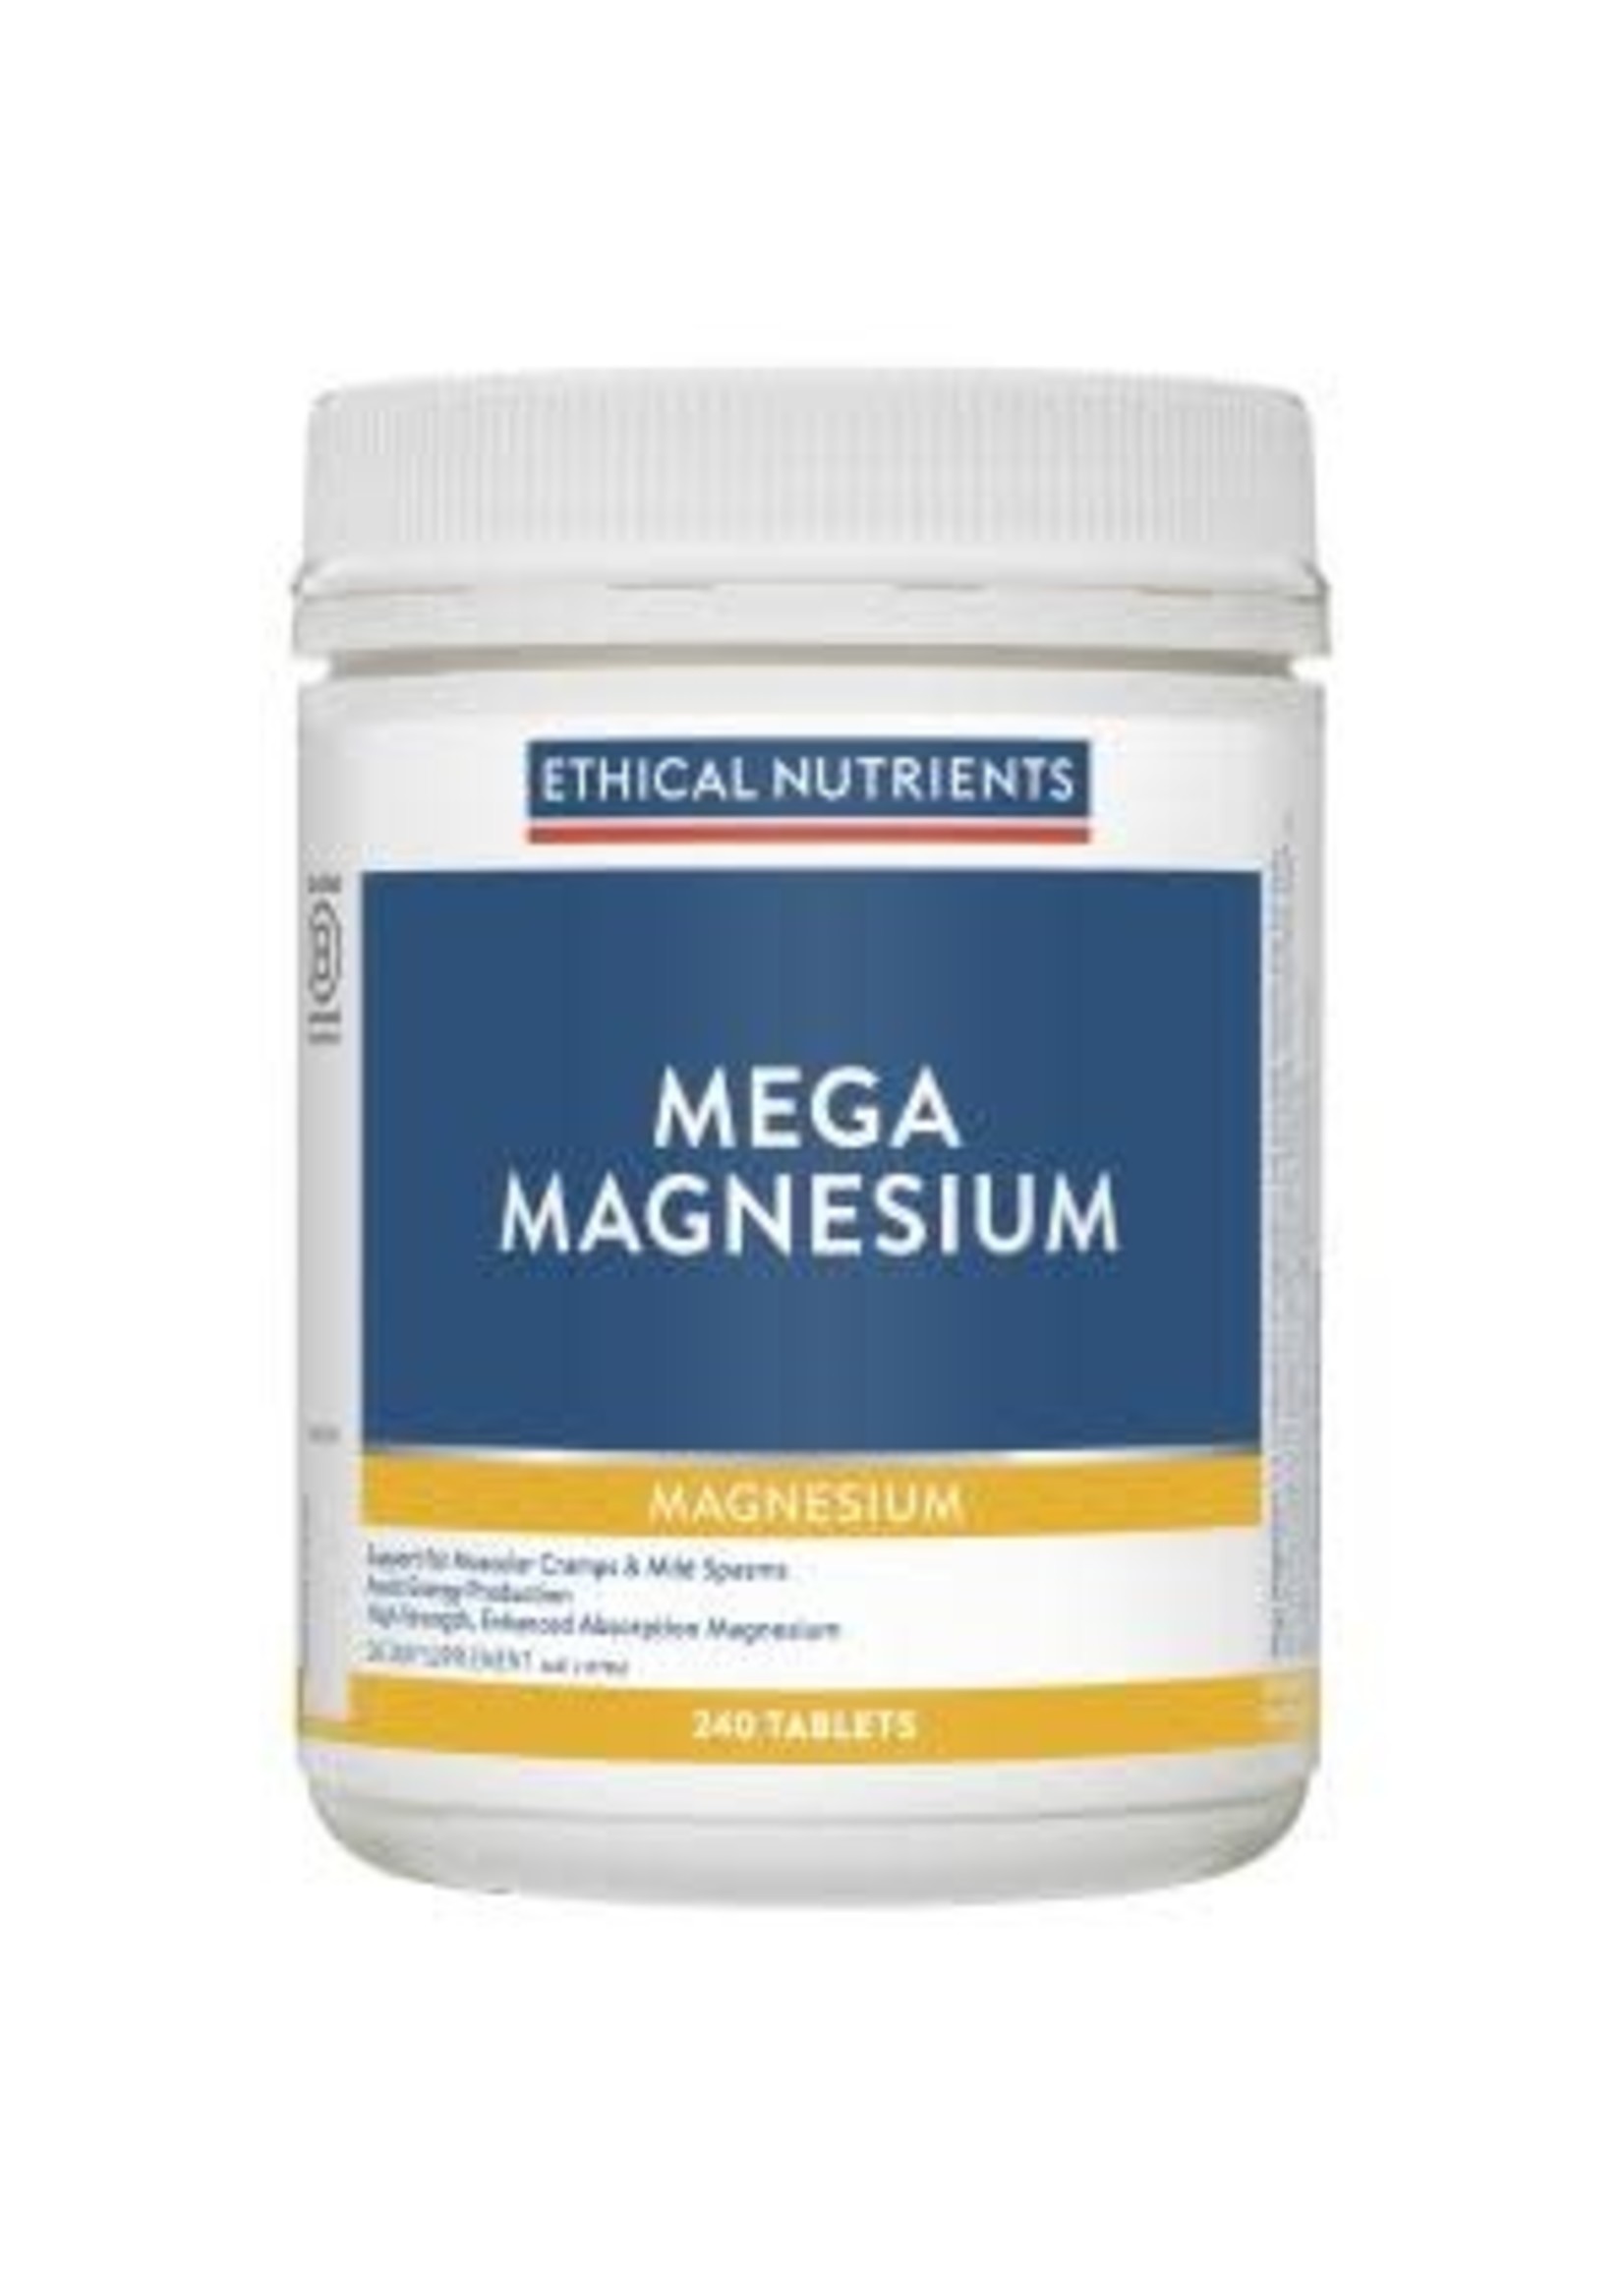 ETHICAL NUTRIENTS Ethical Nutrients Mega Magnesium 240 tablets